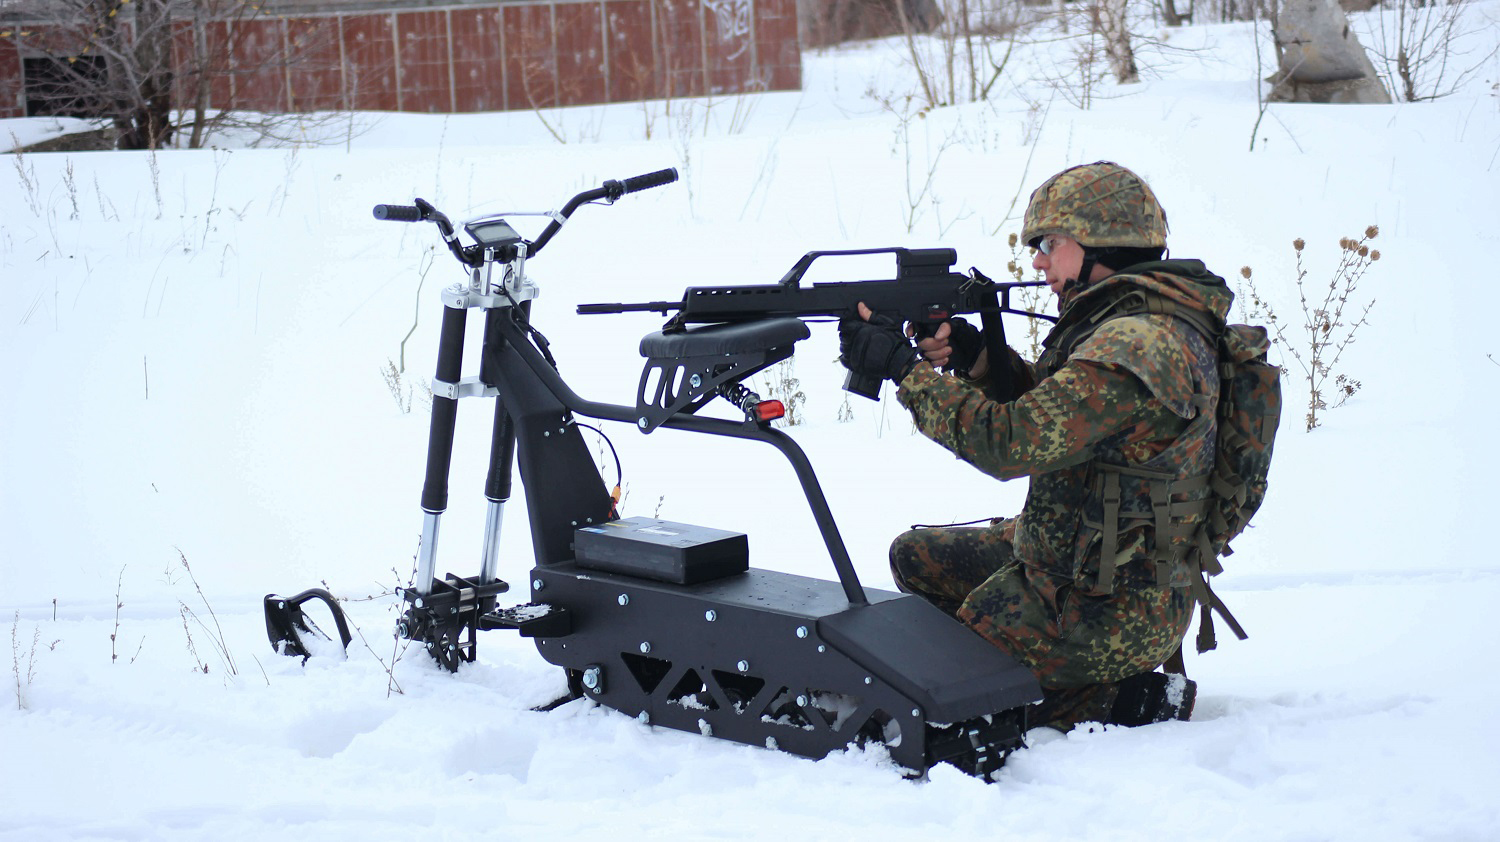 Electric snowbike for Pentyball and Airsoft - My, Snowbike, Snowmobile, All-terrain vehicle, Tracked all-terrain vehicle, Airsoft, Paintball, Video, Longpost